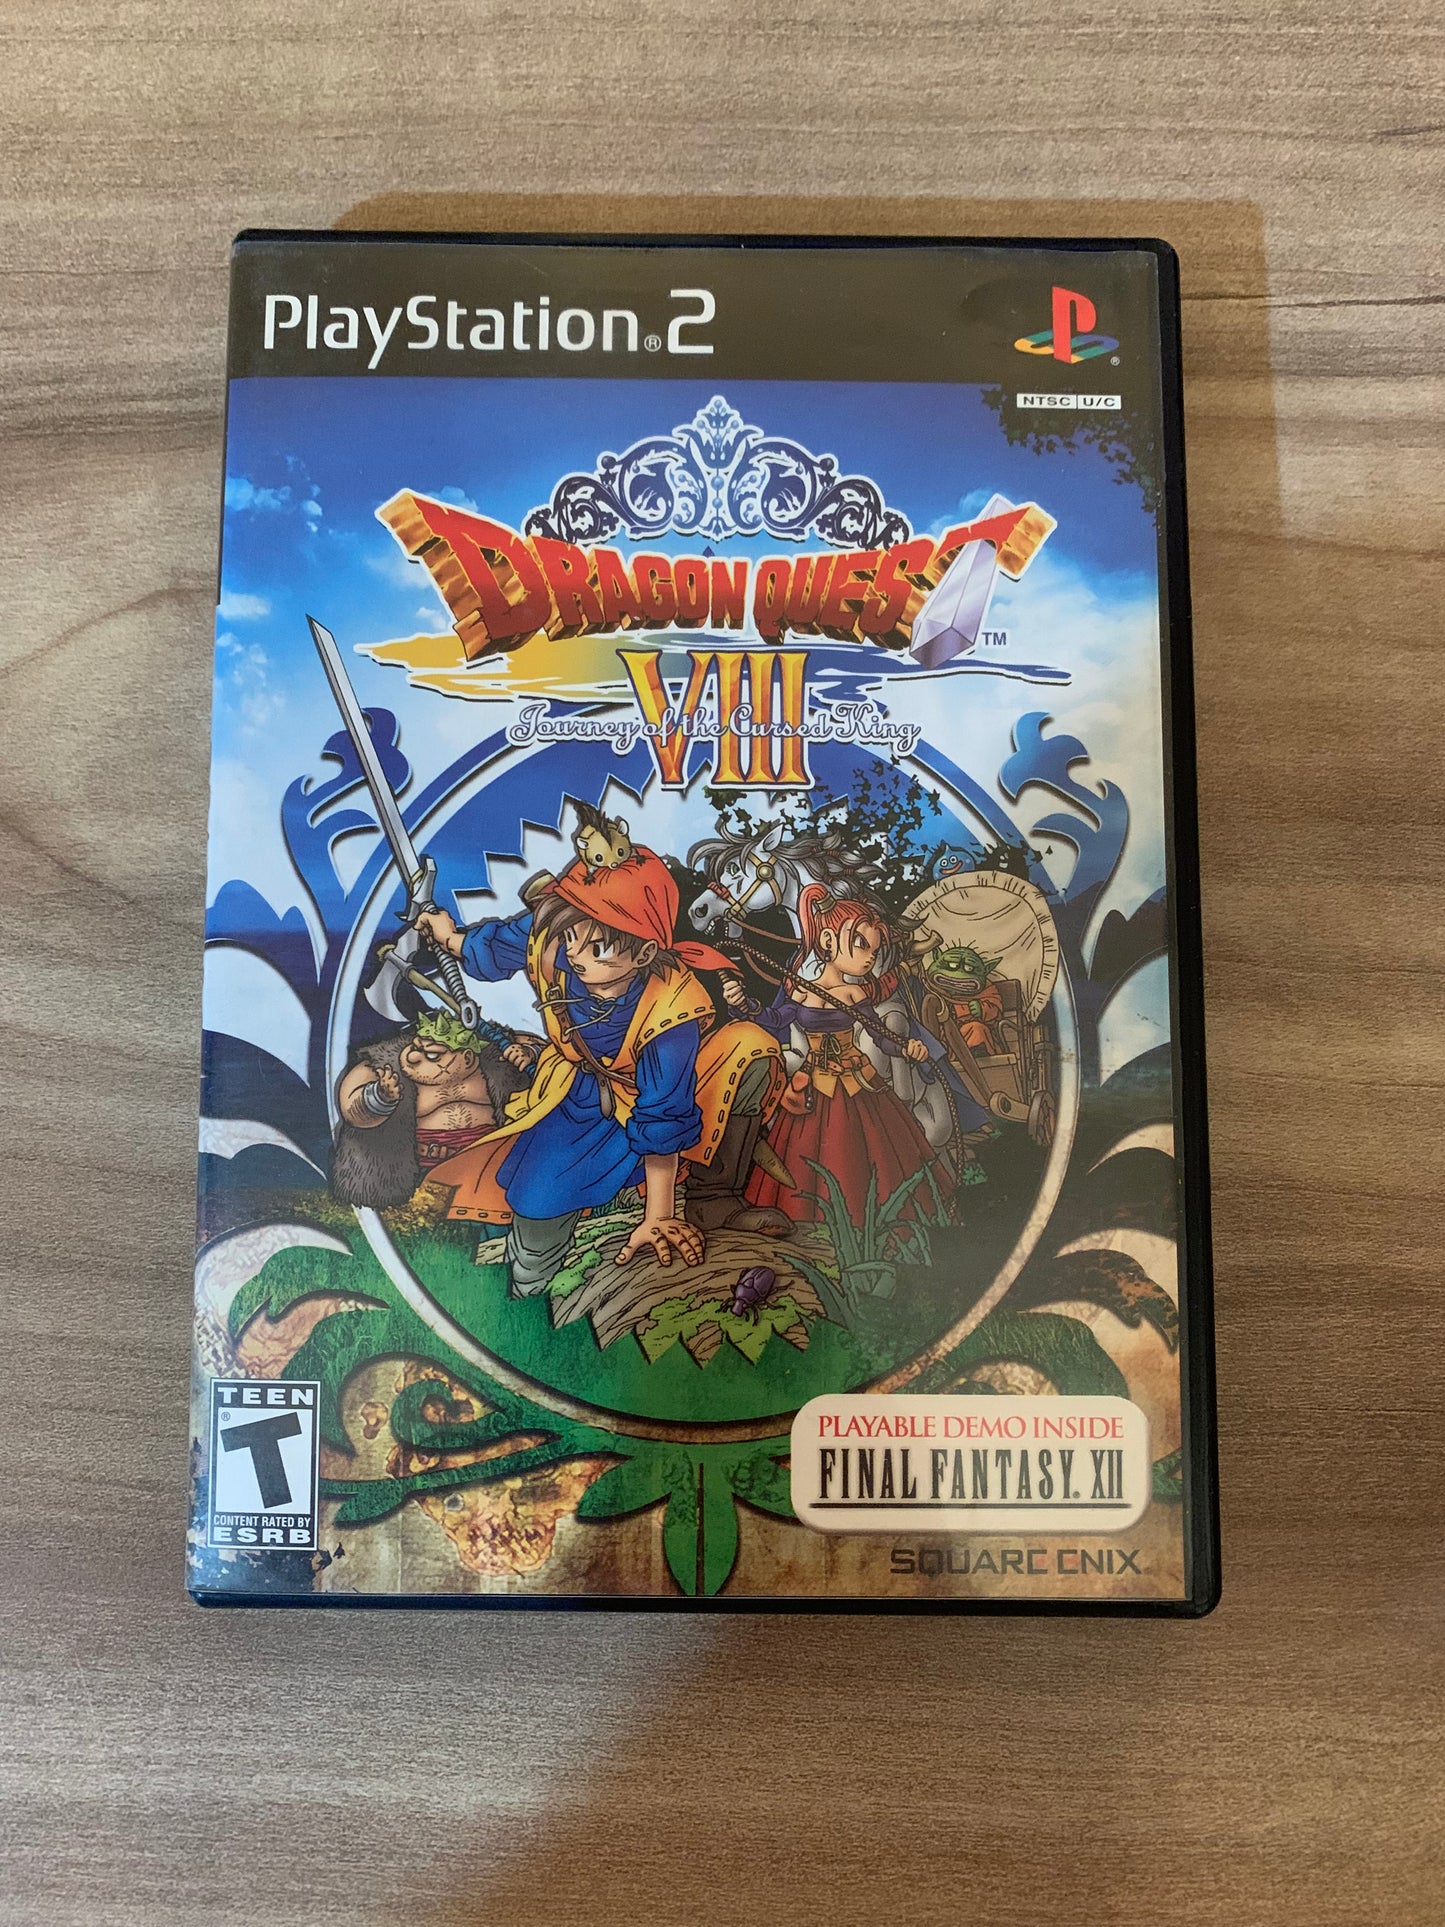 SONY PLAYSTATiON 2 [PS2] | DRAGON QUEST VIII JOURNEY OF THE CURSED KiNG & FiNAL FANTASY XII DEMO